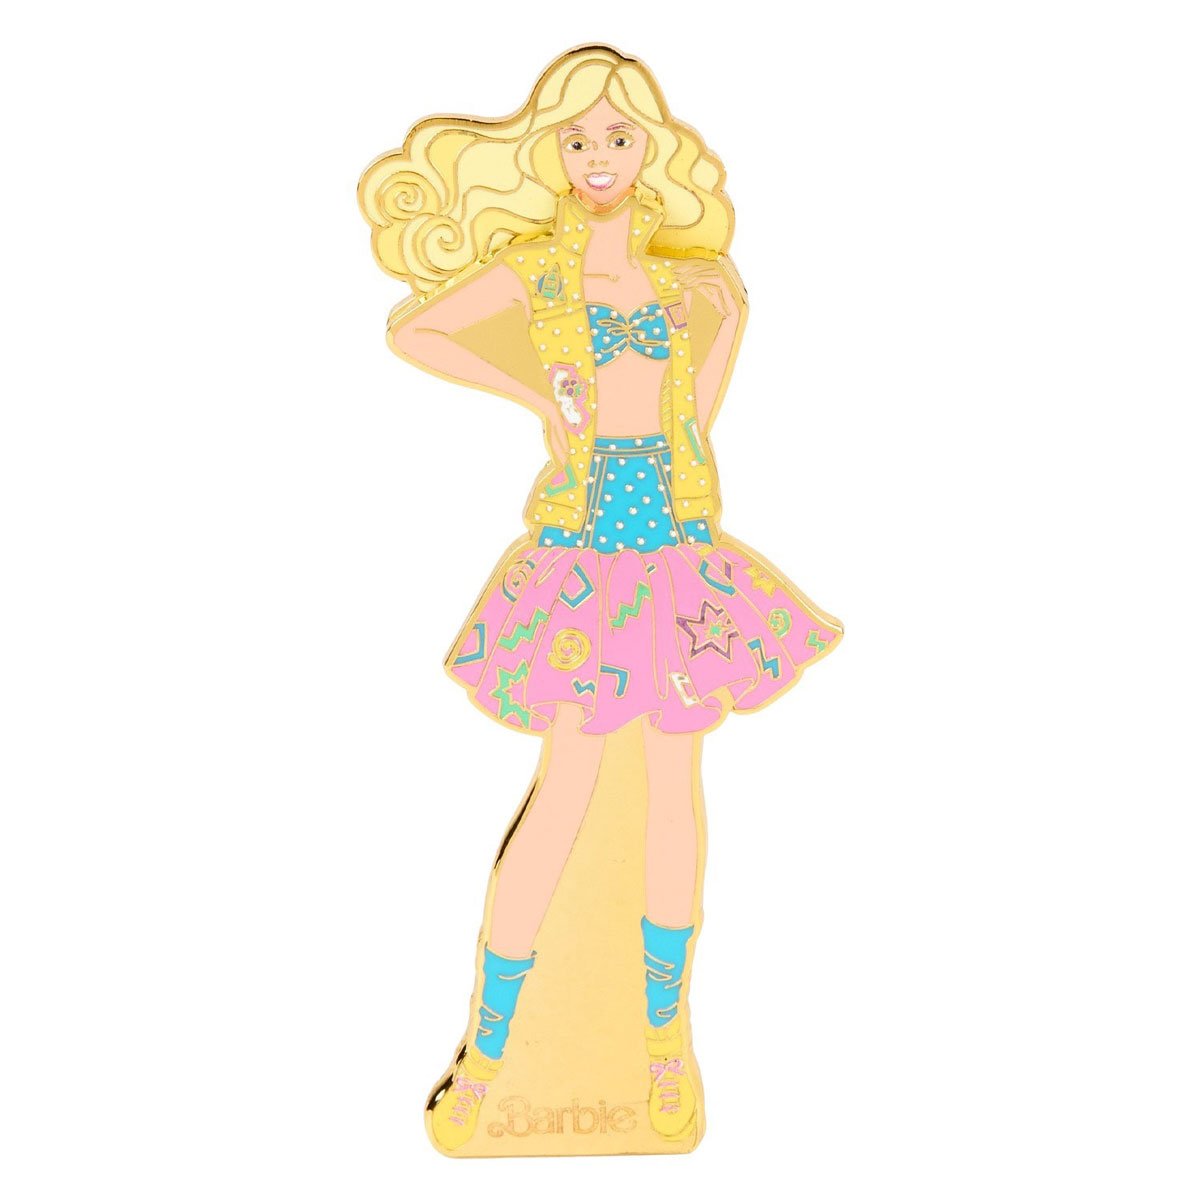 Magnetic pin of Barbie in a vibrant 80s outfit, featuring a pink skirt, blue top, yellow jacket, and blue shoes, with her blonde hair styled in curls, part of the 65th anniversary collection."